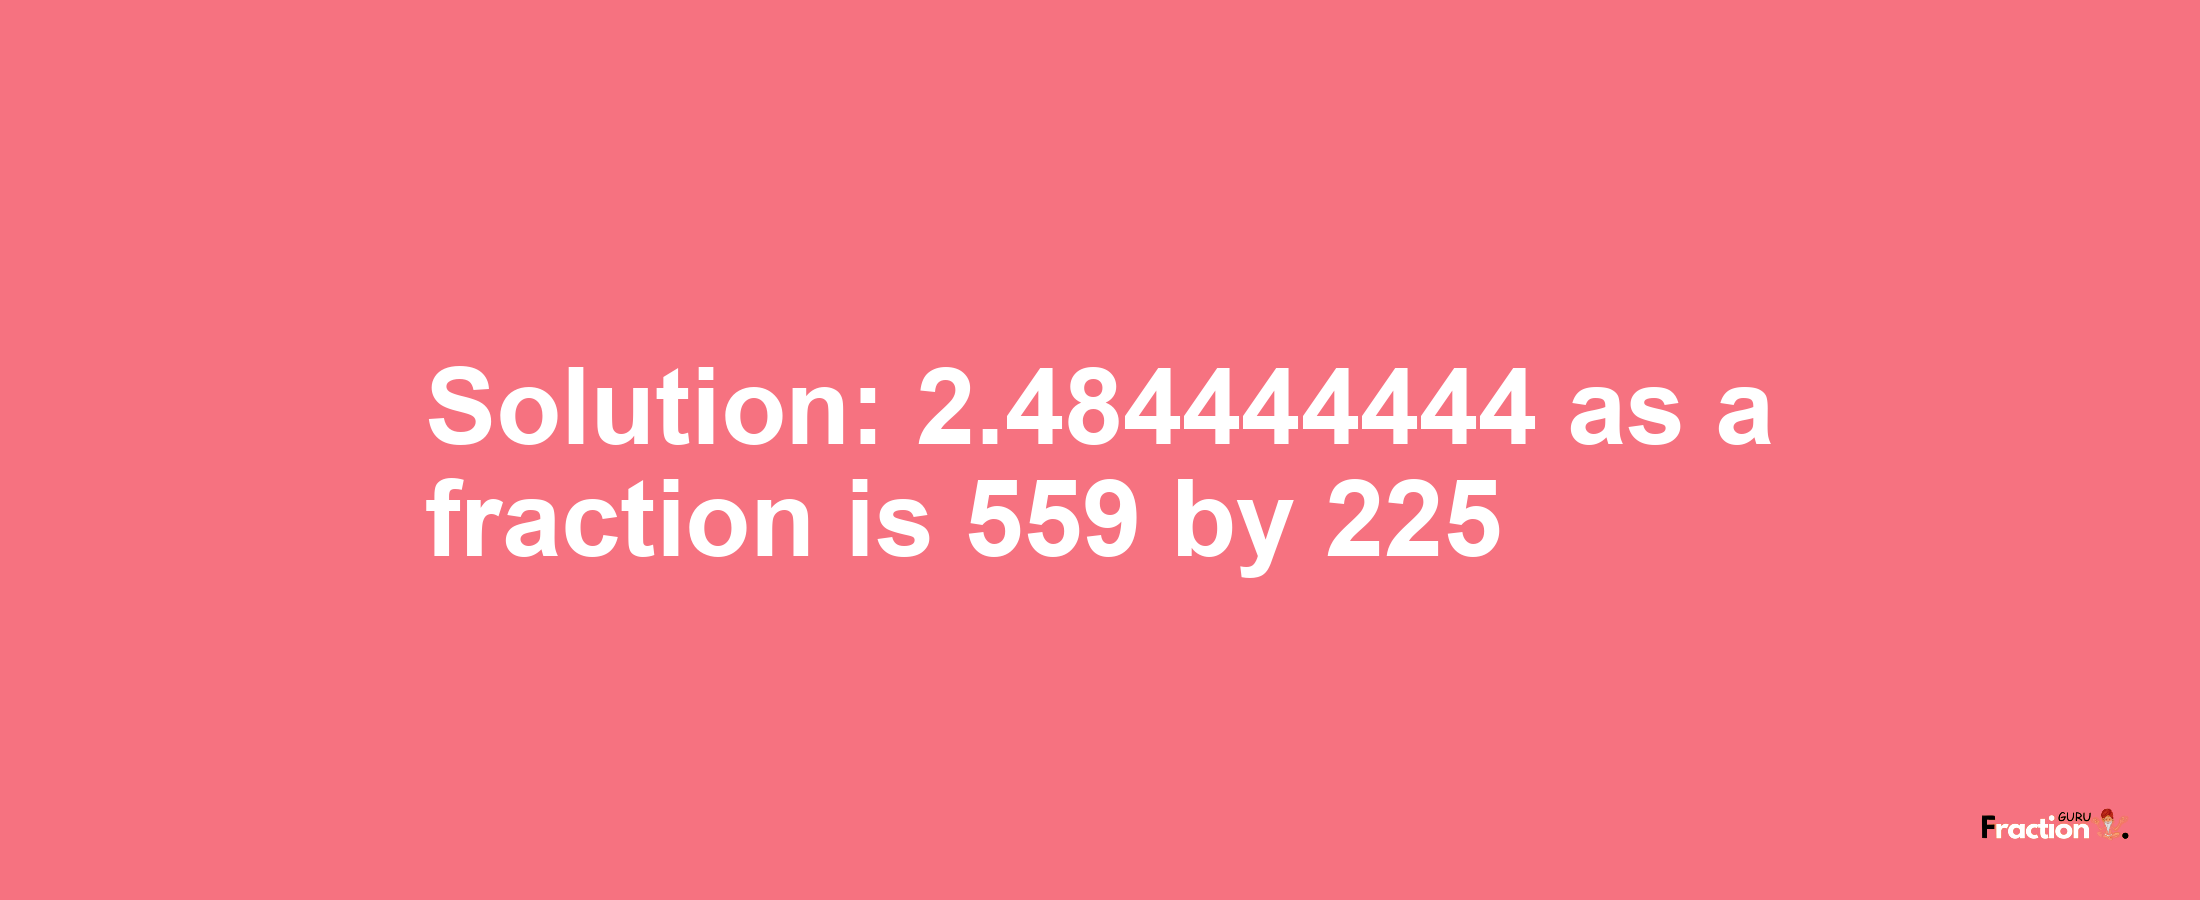 Solution:2.484444444 as a fraction is 559/225